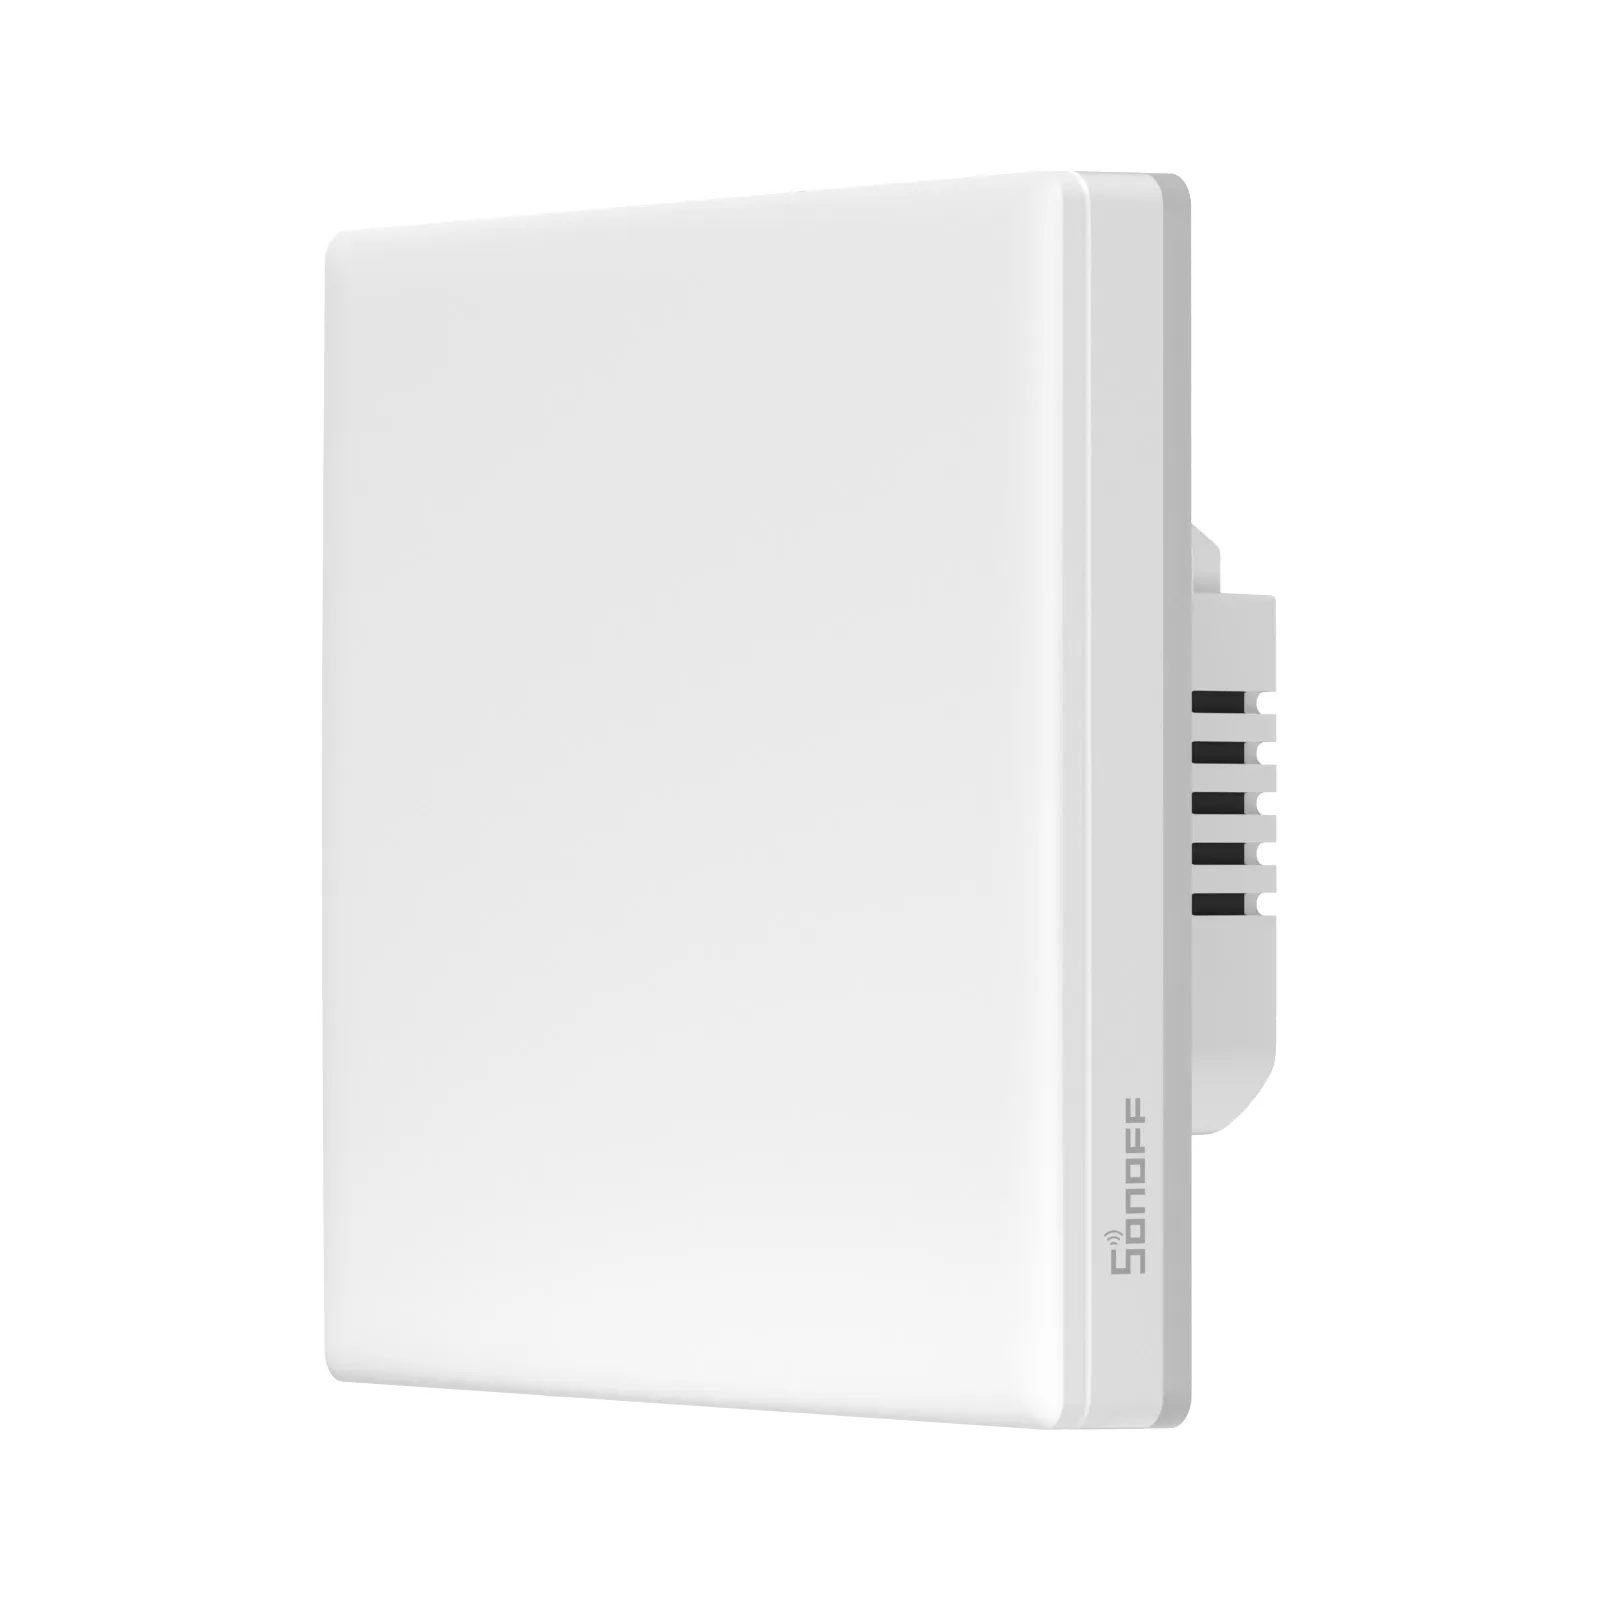 SONOFF TX Ultimate Smart Touch Wall Switch 2